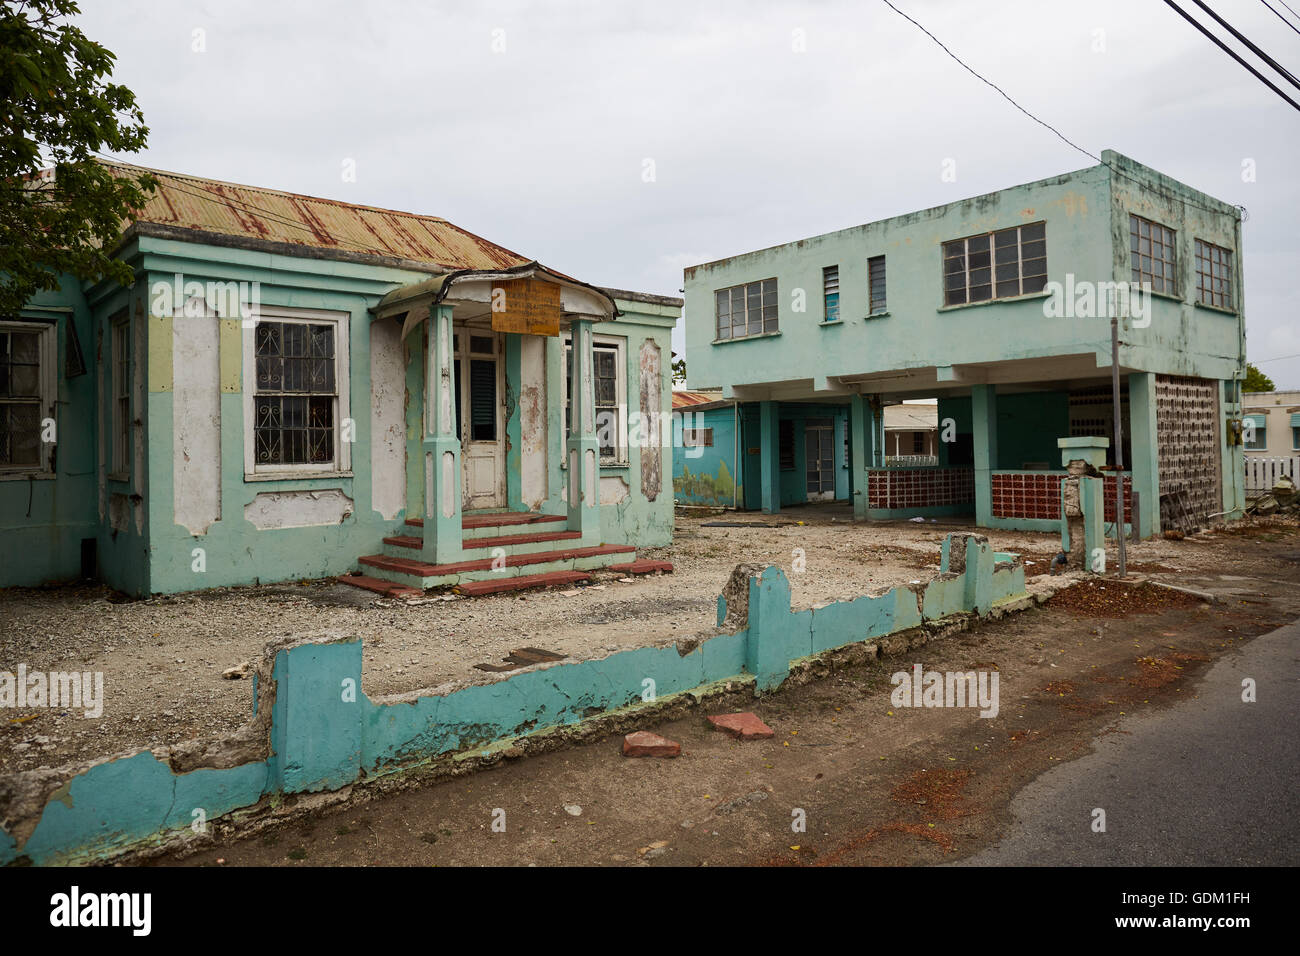 Abandoned taxi office Barbados Caribbean run down derelict urban mess empty disused scruffy building exterior green Stock Photo